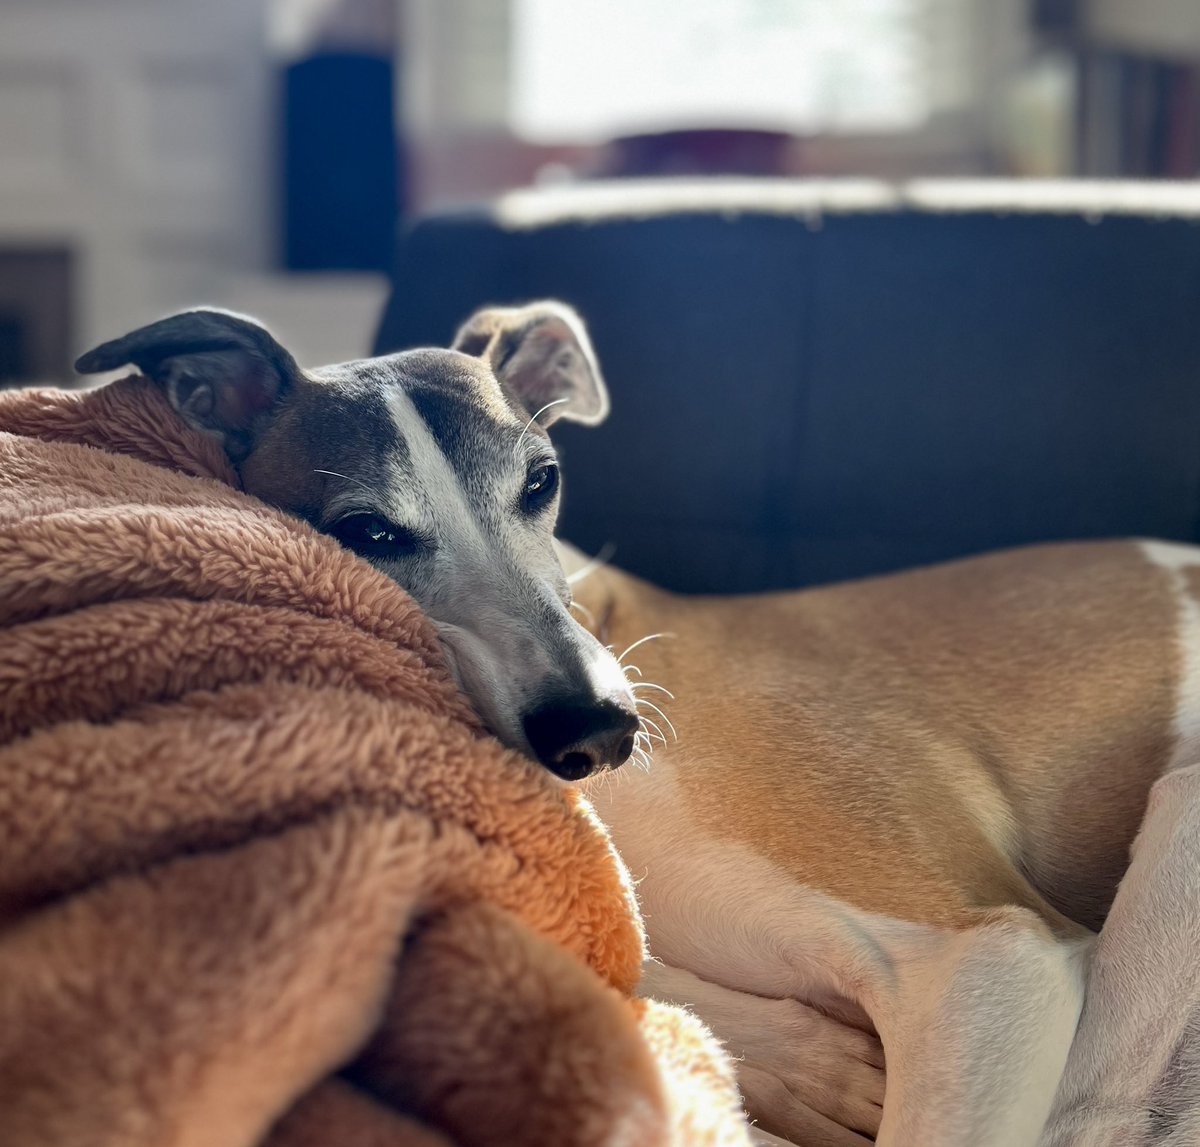 A lady of leisure…
#whippet #dogsoftwitter #hounds #houndsoftwitter 
#saturday